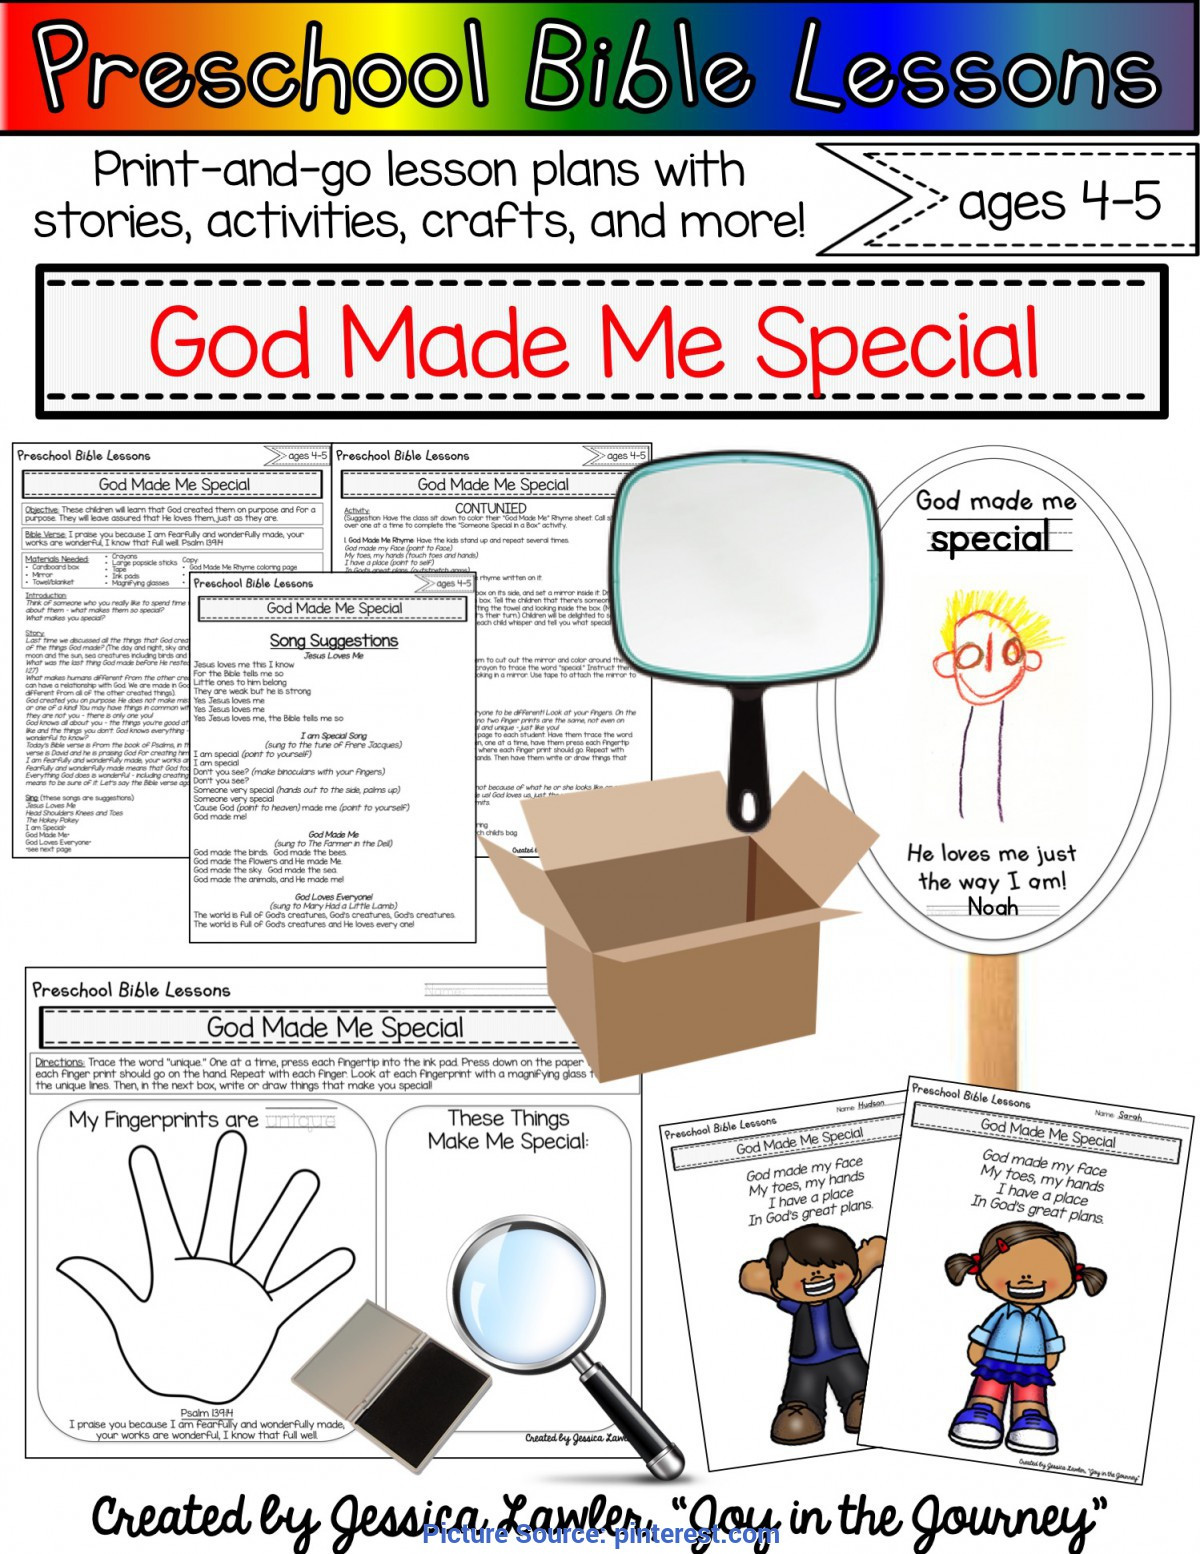 Sunday School Lesson Plans Preschool Bible Lessons God Made Me Special